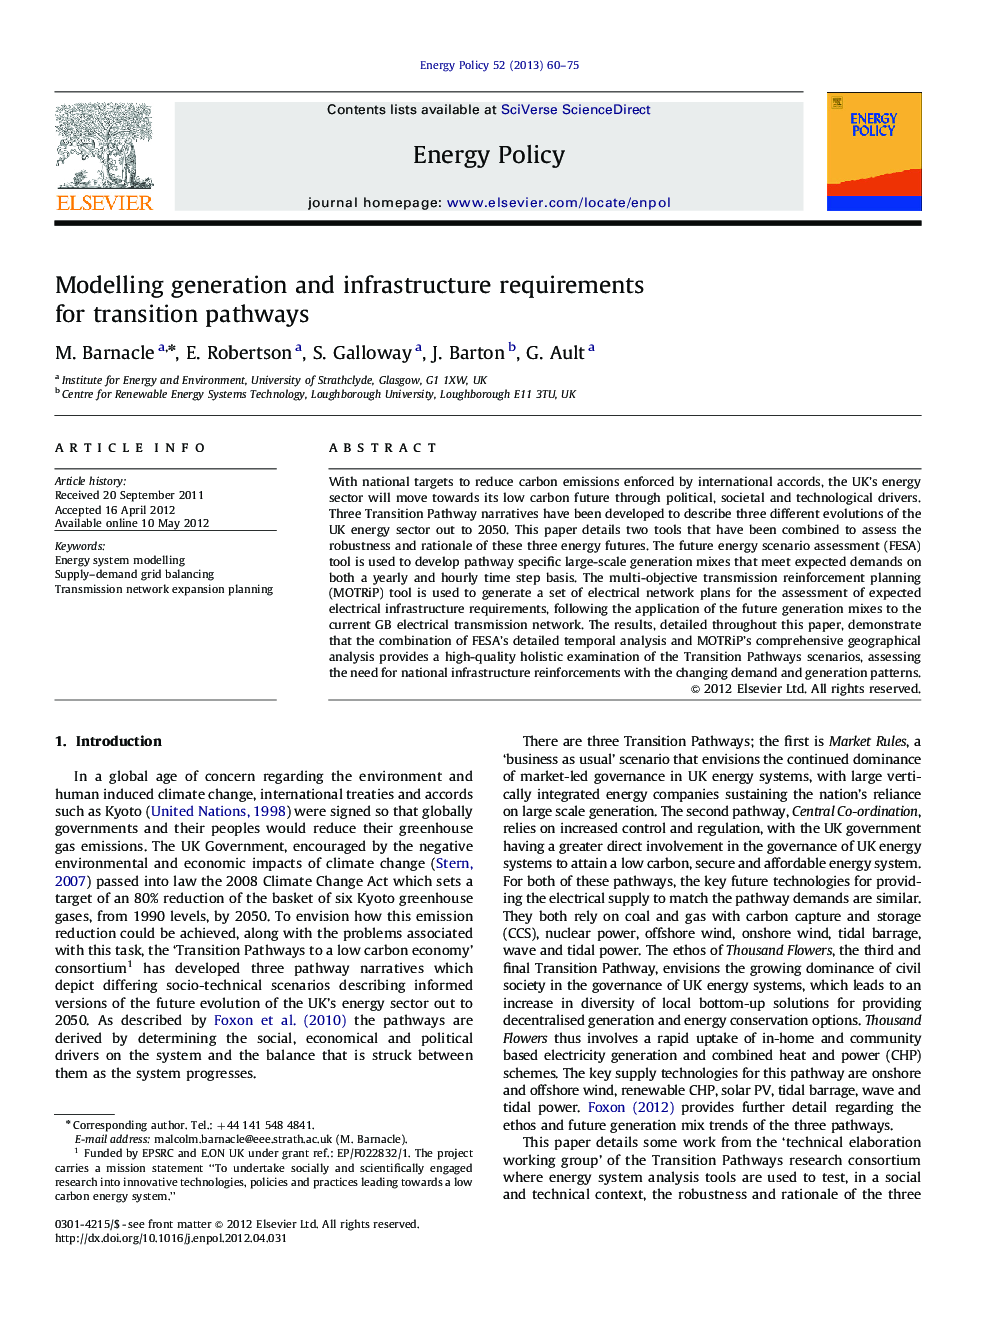 Modelling generation and infrastructure requirements for transition pathways